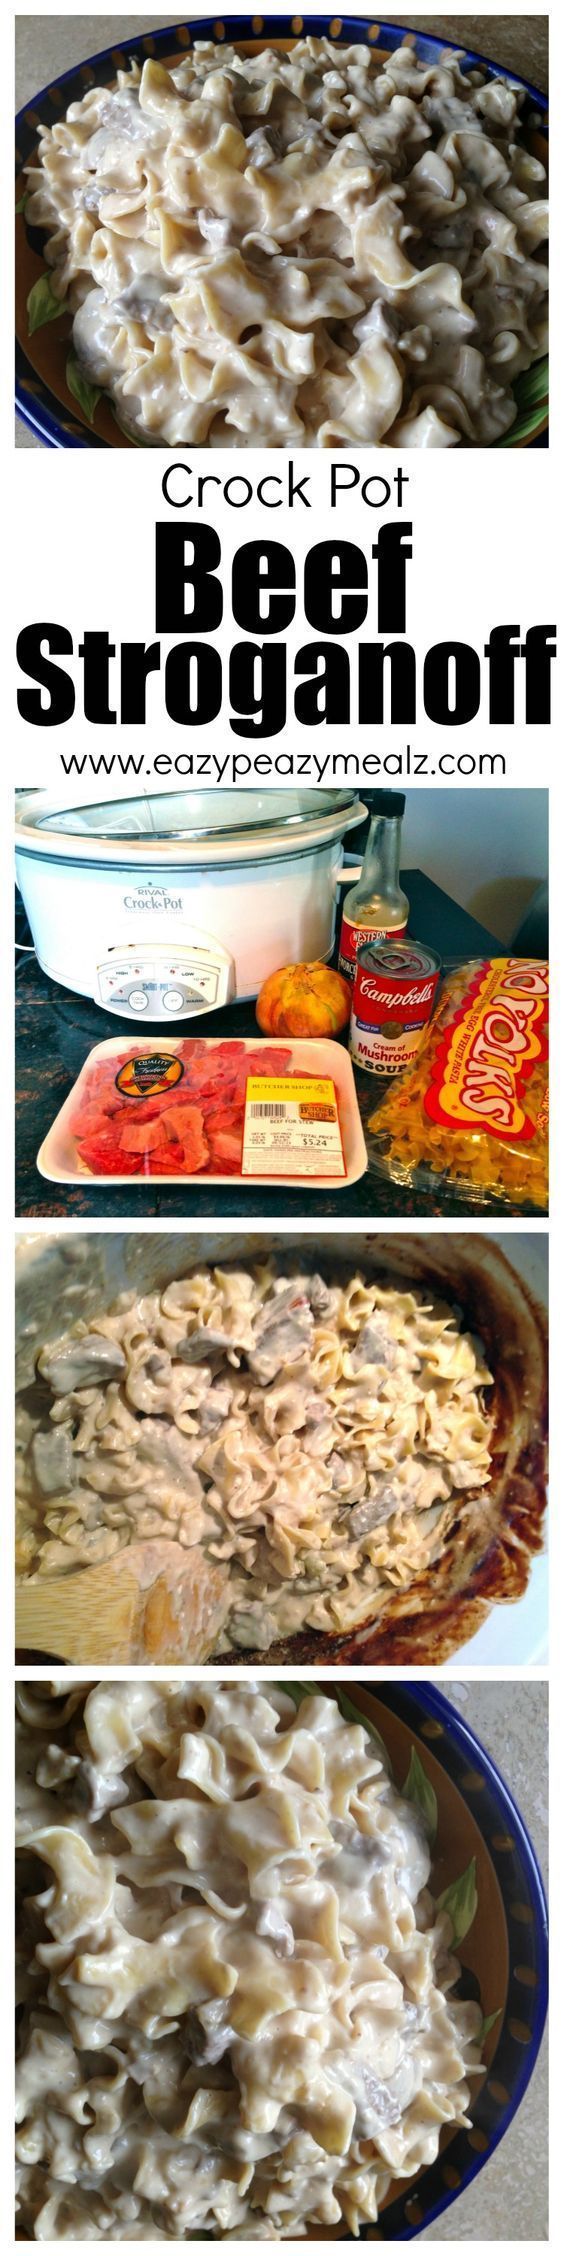 Fast, easy to make, beef stroganoff, that is family friendly and cooked in the Slow Cooker or Crock Pot! This is one of the most